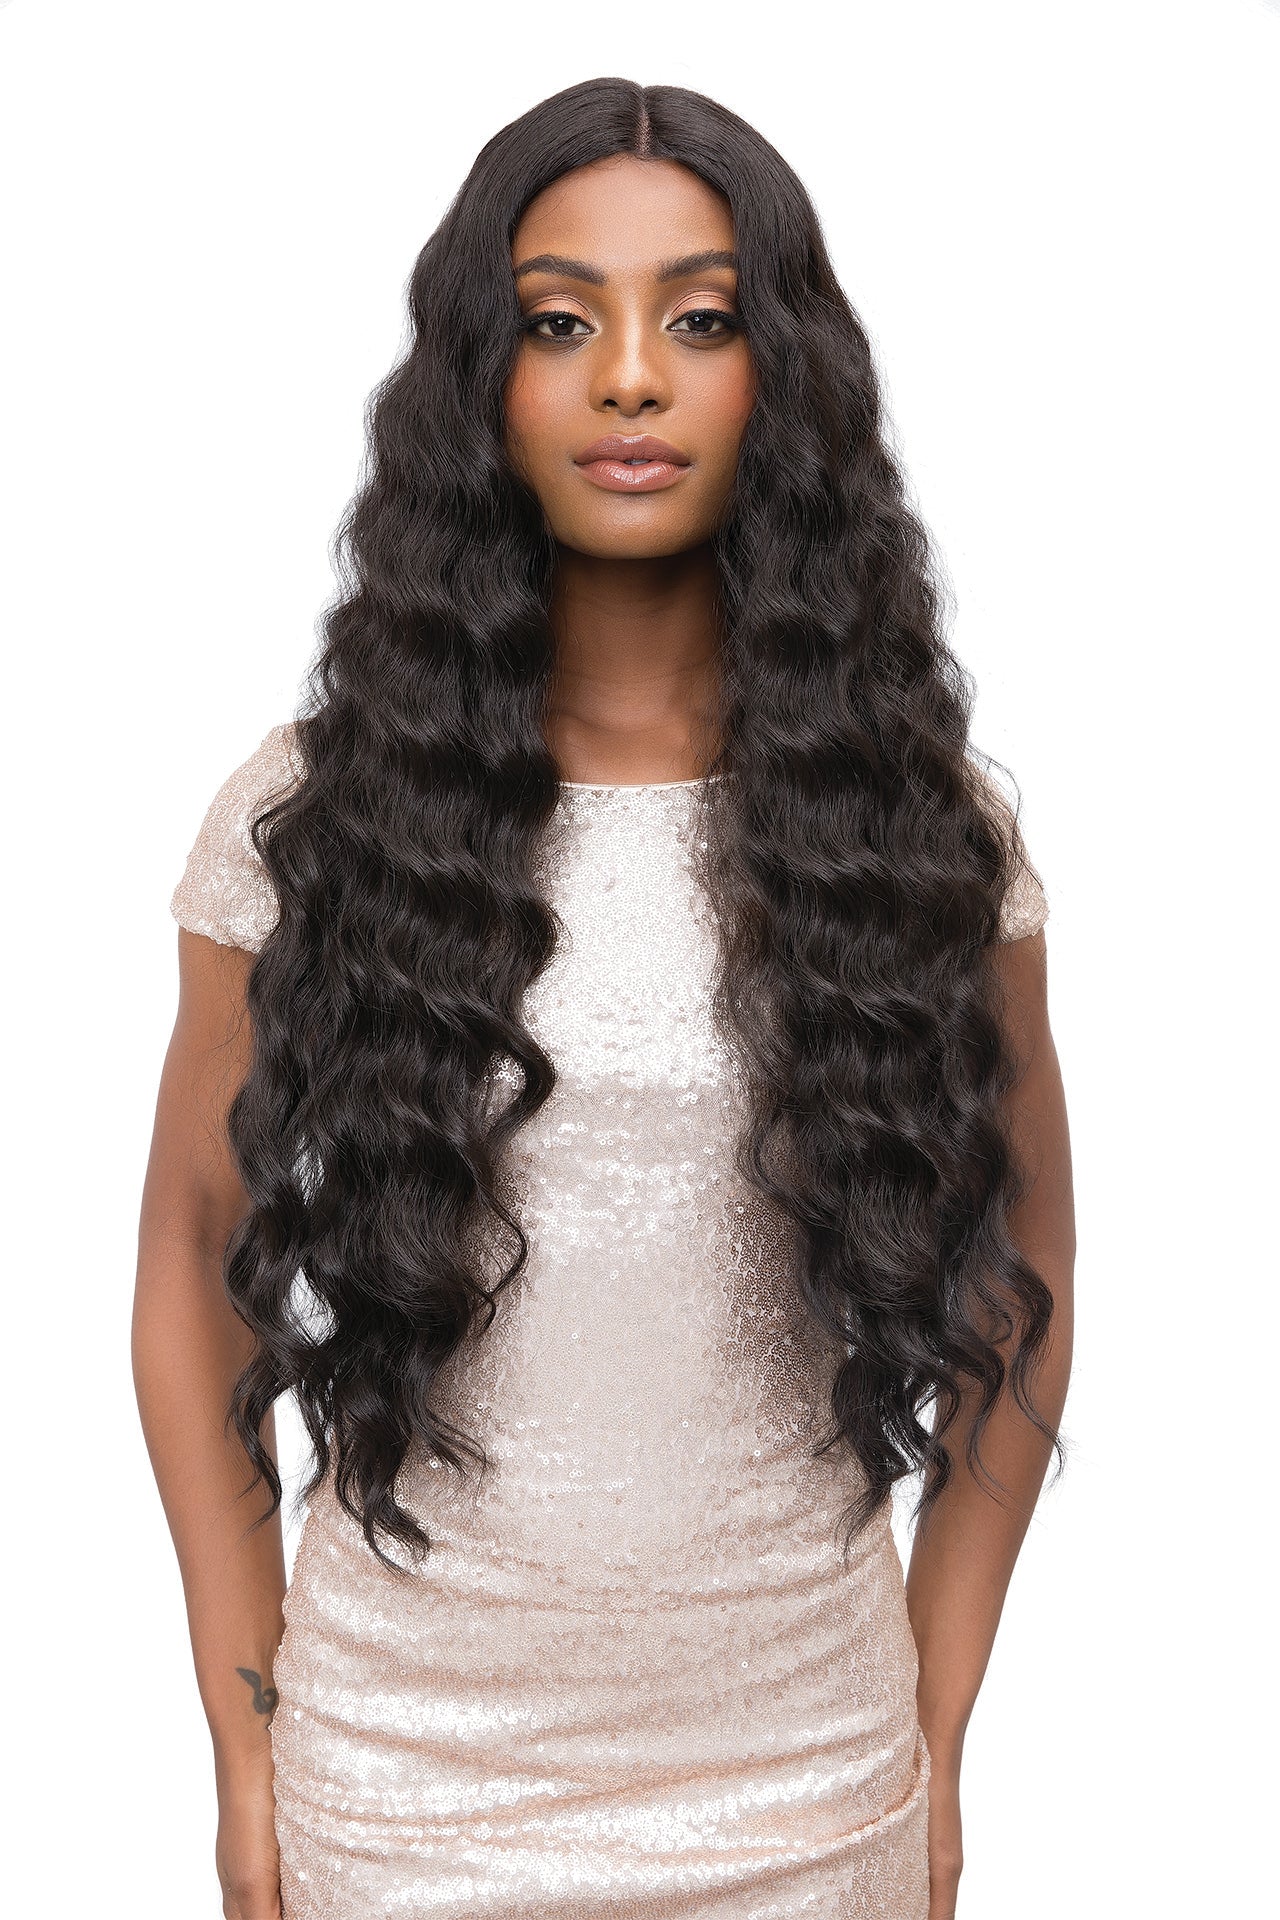 JANET COLLECTIONS - EXTENDED PART JULIANA WIG